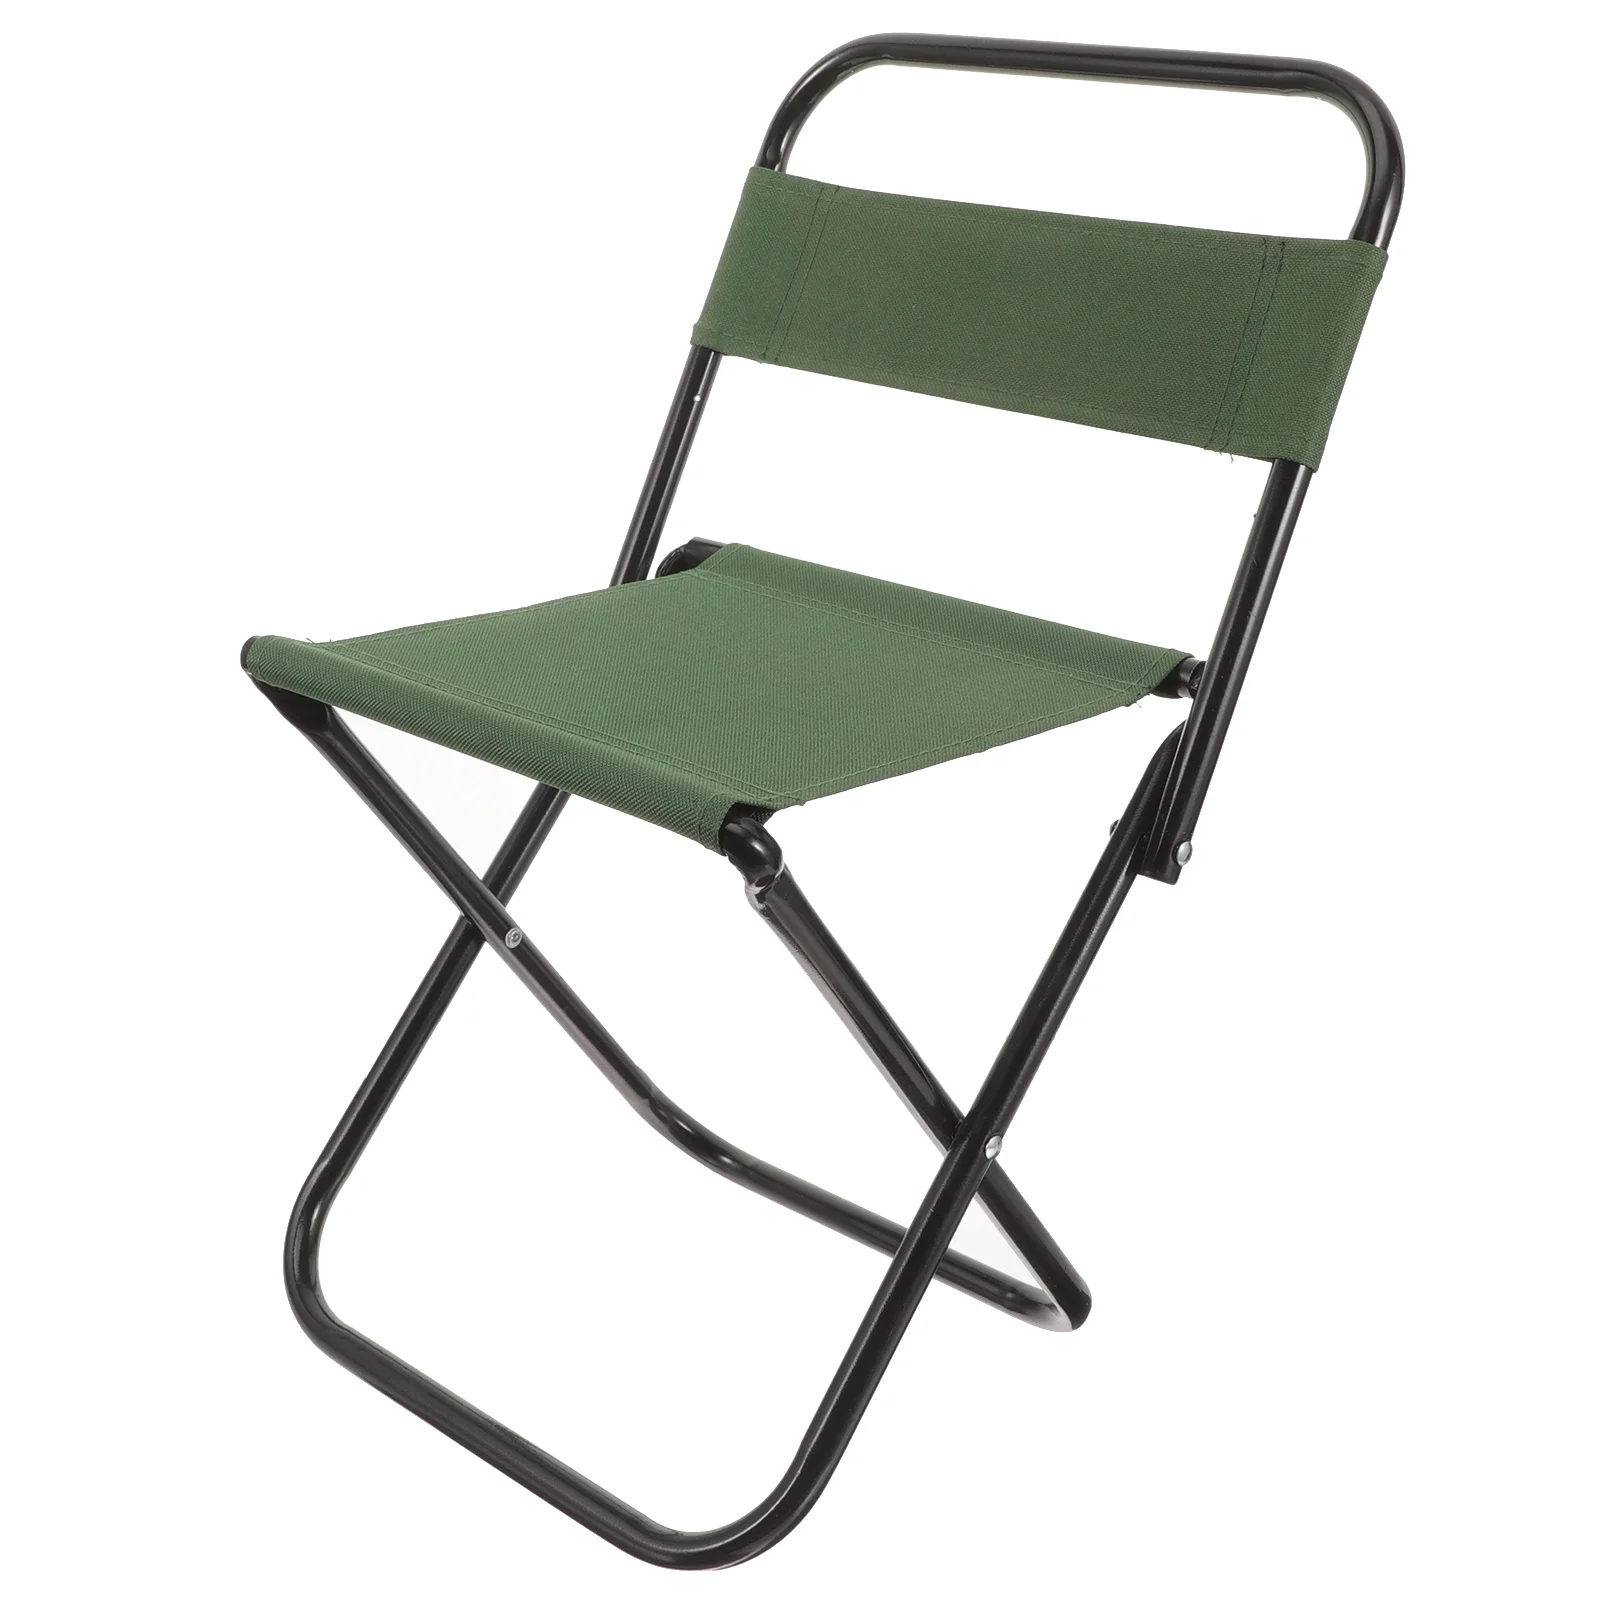 

Small Square Stool with Backrest Fold up Chair Camping Chairs Folding for outside Cloth Table Portable